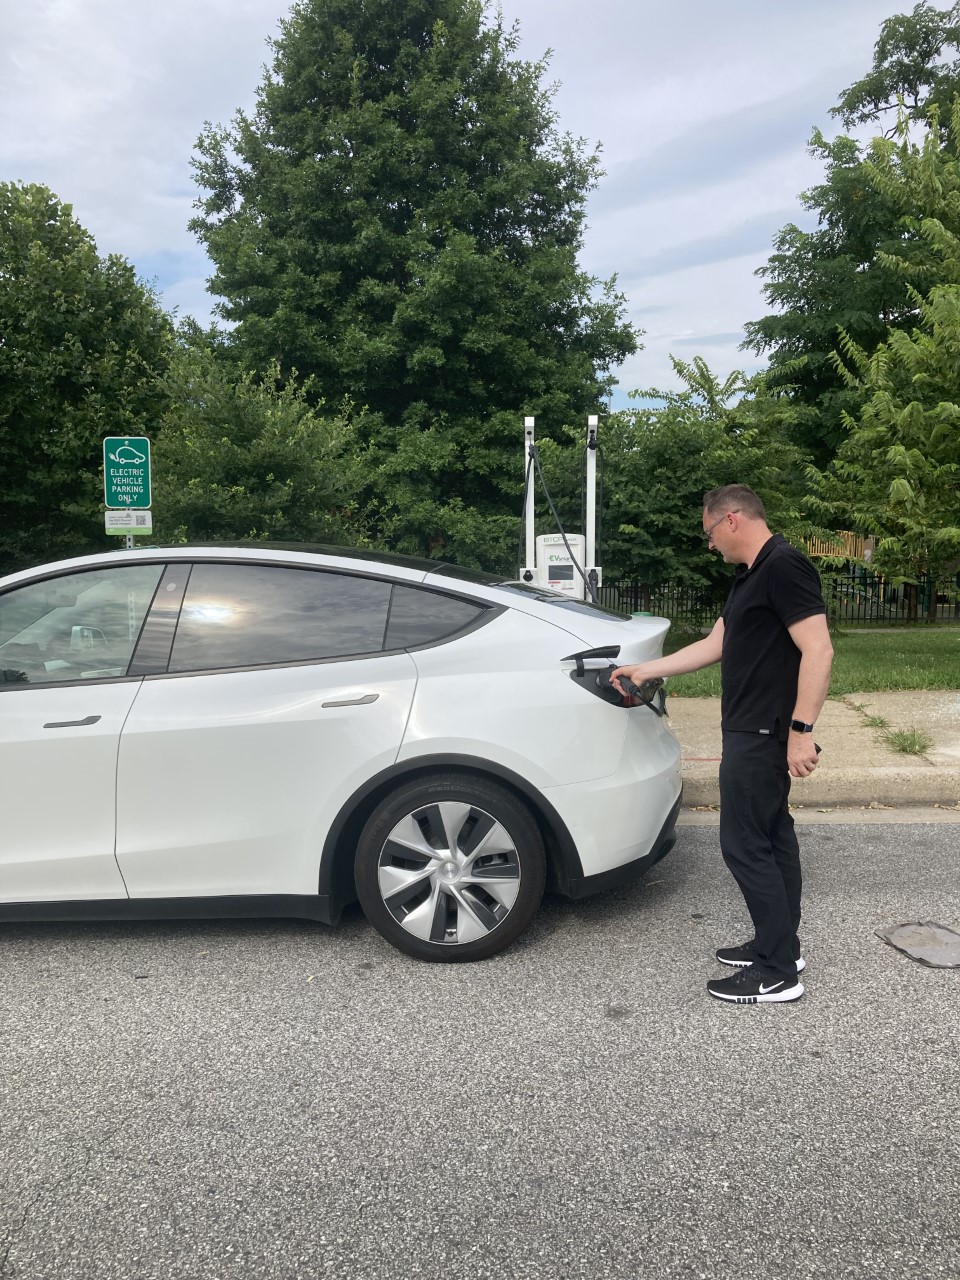 Man standing next to white car holding charger